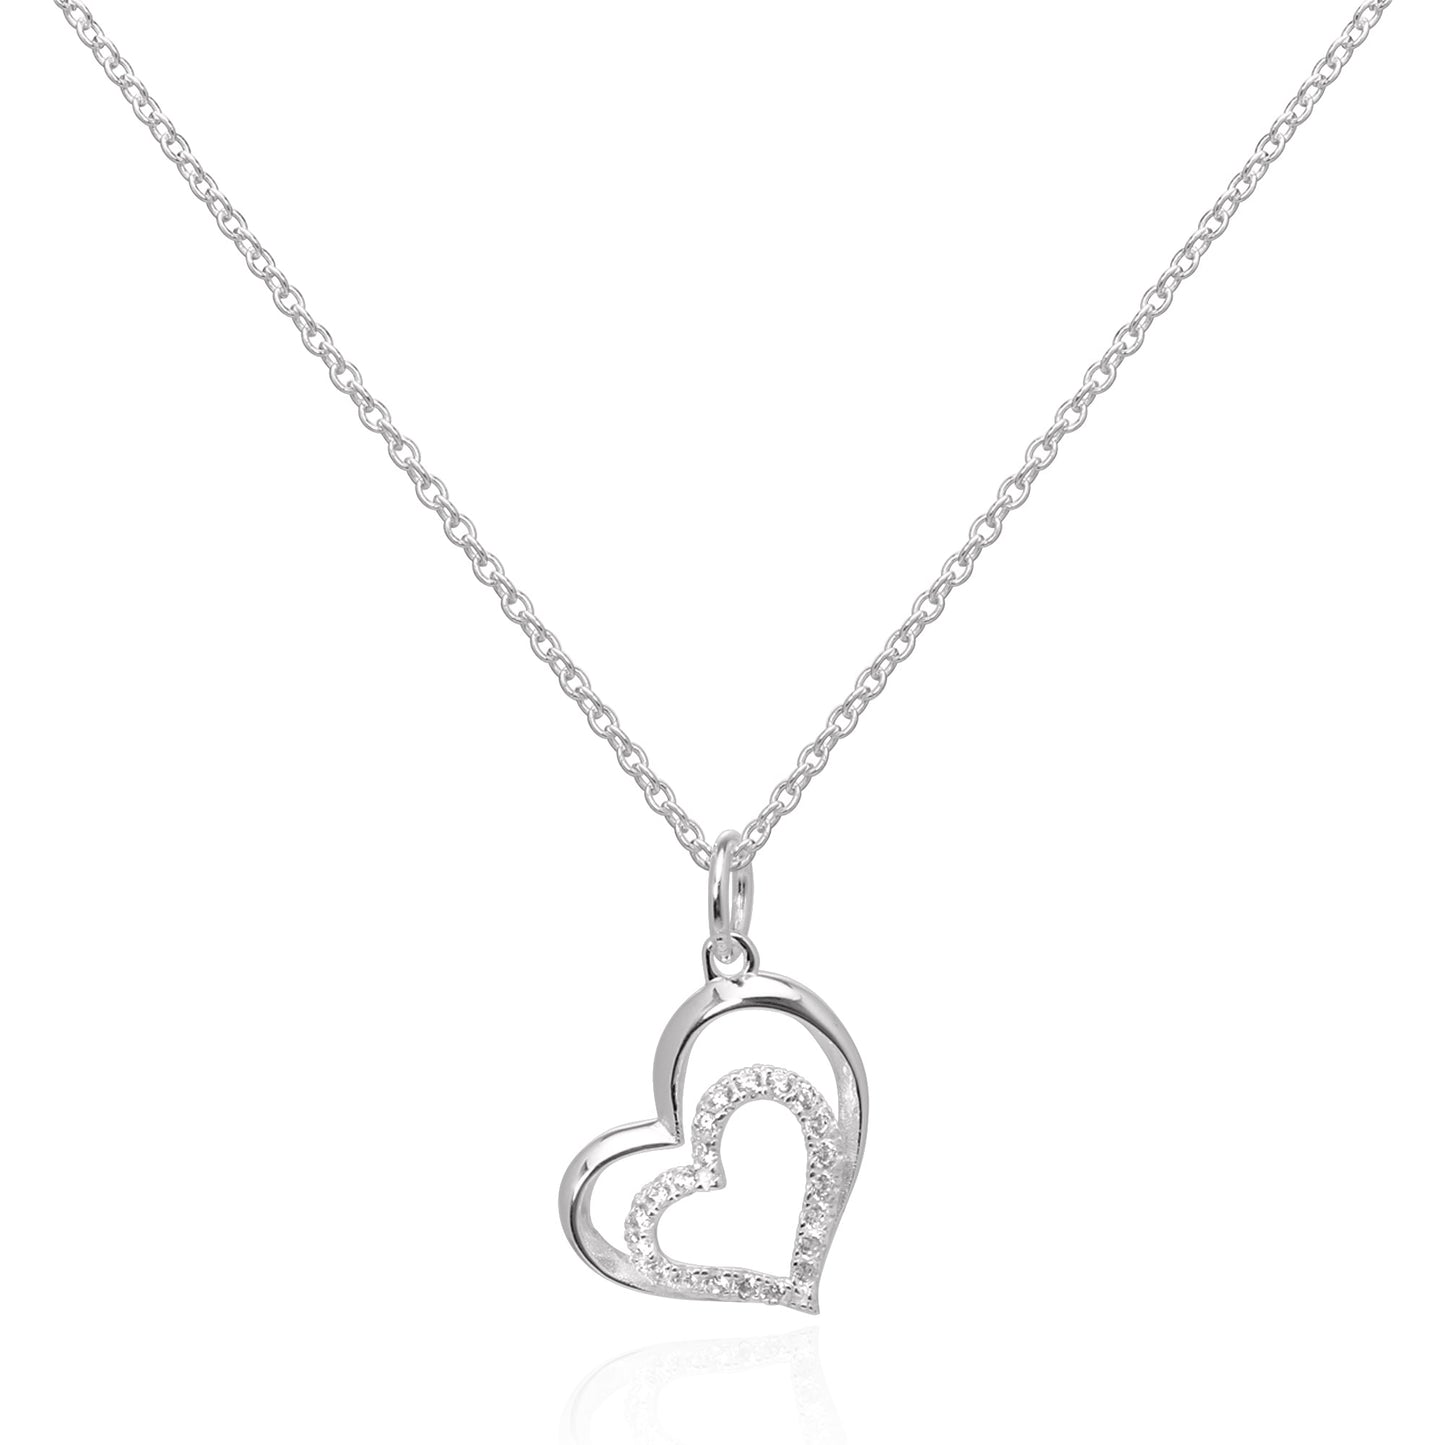 Sterling Silver & CZ Crystal Double Open Heart Pendant Necklace 16 - 22 Inches